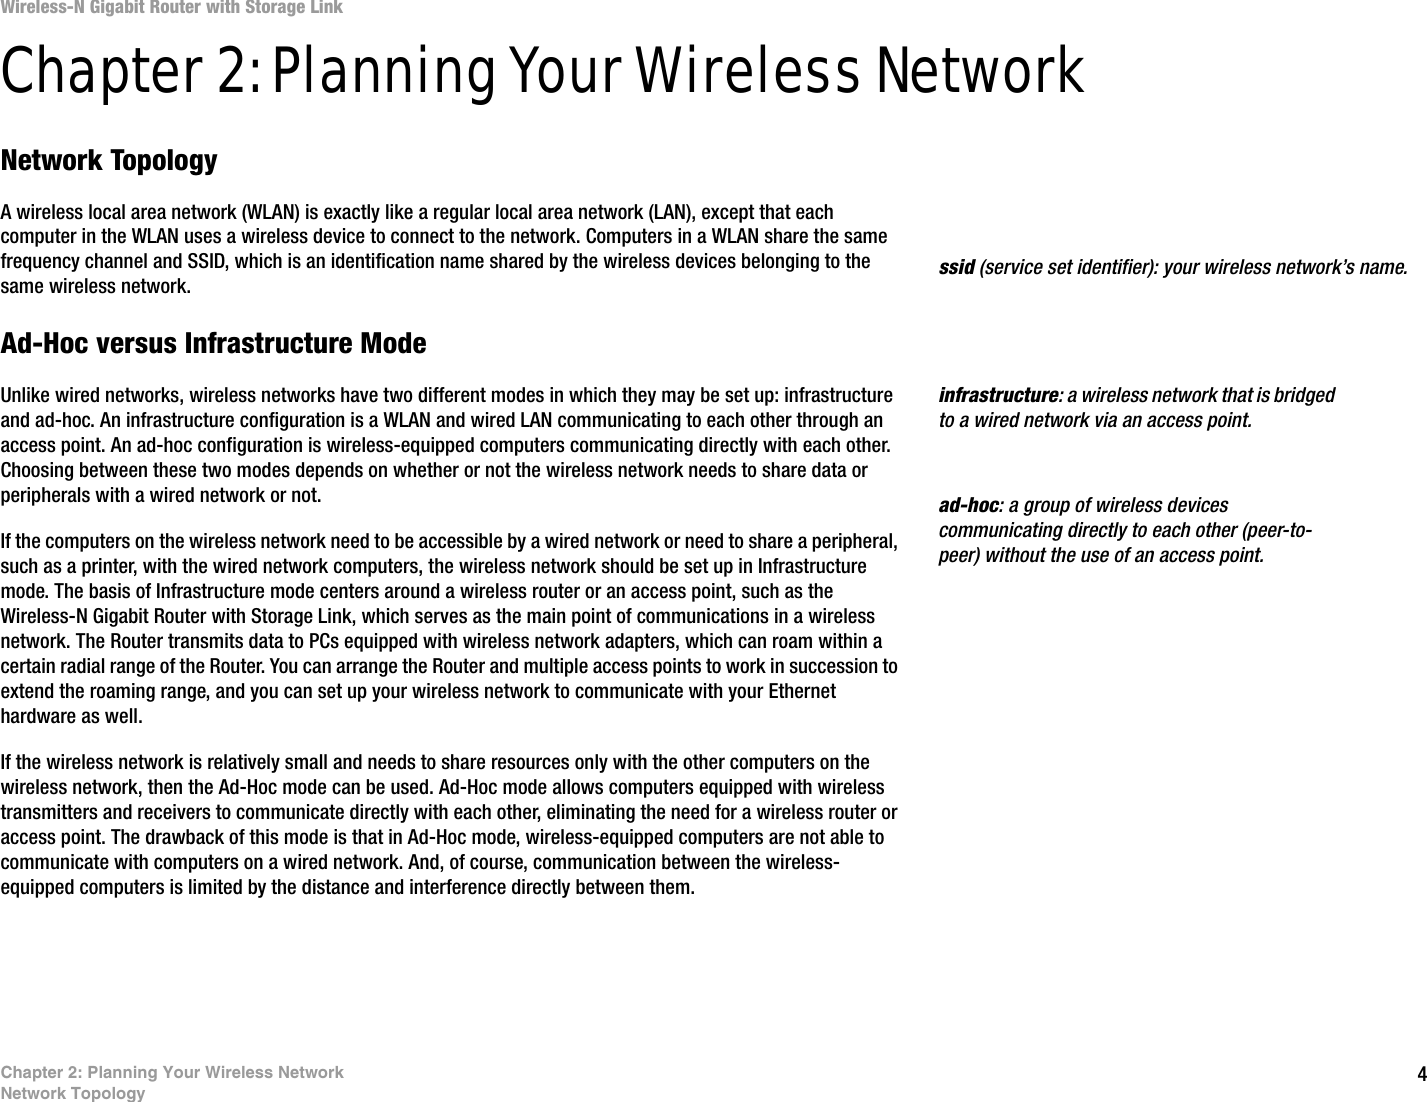 4Chapter 2: Planning Your Wireless NetworkNetwork TopologyWireless-N Gigabit Router with Storage LinkChapter 2: Planning Your Wireless NetworkNetwork TopologyA wireless local area network (WLAN) is exactly like a regular local area network (LAN), except that each computer in the WLAN uses a wireless device to connect to the network. Computers in a WLAN share the same frequency channel and SSID, which is an identification name shared by the wireless devices belonging to the same wireless network.Ad-Hoc versus Infrastructure ModeUnlike wired networks, wireless networks have two different modes in which they may be set up: infrastructure and ad-hoc. An infrastructure configuration is a WLAN and wired LAN communicating to each other through an access point. An ad-hoc configuration is wireless-equipped computers communicating directly with each other. Choosing between these two modes depends on whether or not the wireless network needs to share data or peripherals with a wired network or not. If the computers on the wireless network need to be accessible by a wired network or need to share a peripheral, such as a printer, with the wired network computers, the wireless network should be set up in Infrastructure mode. The basis of Infrastructure mode centers around a wireless router or an access point, such as the Wireless-N Gigabit Router with Storage Link, which serves as the main point of communications in a wireless network. The Router transmits data to PCs equipped with wireless network adapters, which can roam within a certain radial range of the Router. You can arrange the Router and multiple access points to work in succession to extend the roaming range, and you can set up your wireless network to communicate with your Ethernet hardware as well. If the wireless network is relatively small and needs to share resources only with the other computers on the wireless network, then the Ad-Hoc mode can be used. Ad-Hoc mode allows computers equipped with wireless transmitters and receivers to communicate directly with each other, eliminating the need for a wireless router or access point. The drawback of this mode is that in Ad-Hoc mode, wireless-equipped computers are not able to communicate with computers on a wired network. And, of course, communication between the wireless-equipped computers is limited by the distance and interference directly between them. infrastructure: a wireless network that is bridged to a wired network via an access point.ssid (service set identifier): your wireless network’s name.ad-hoc: a group of wireless devices communicating directly to each other (peer-to-peer) without the use of an access point.